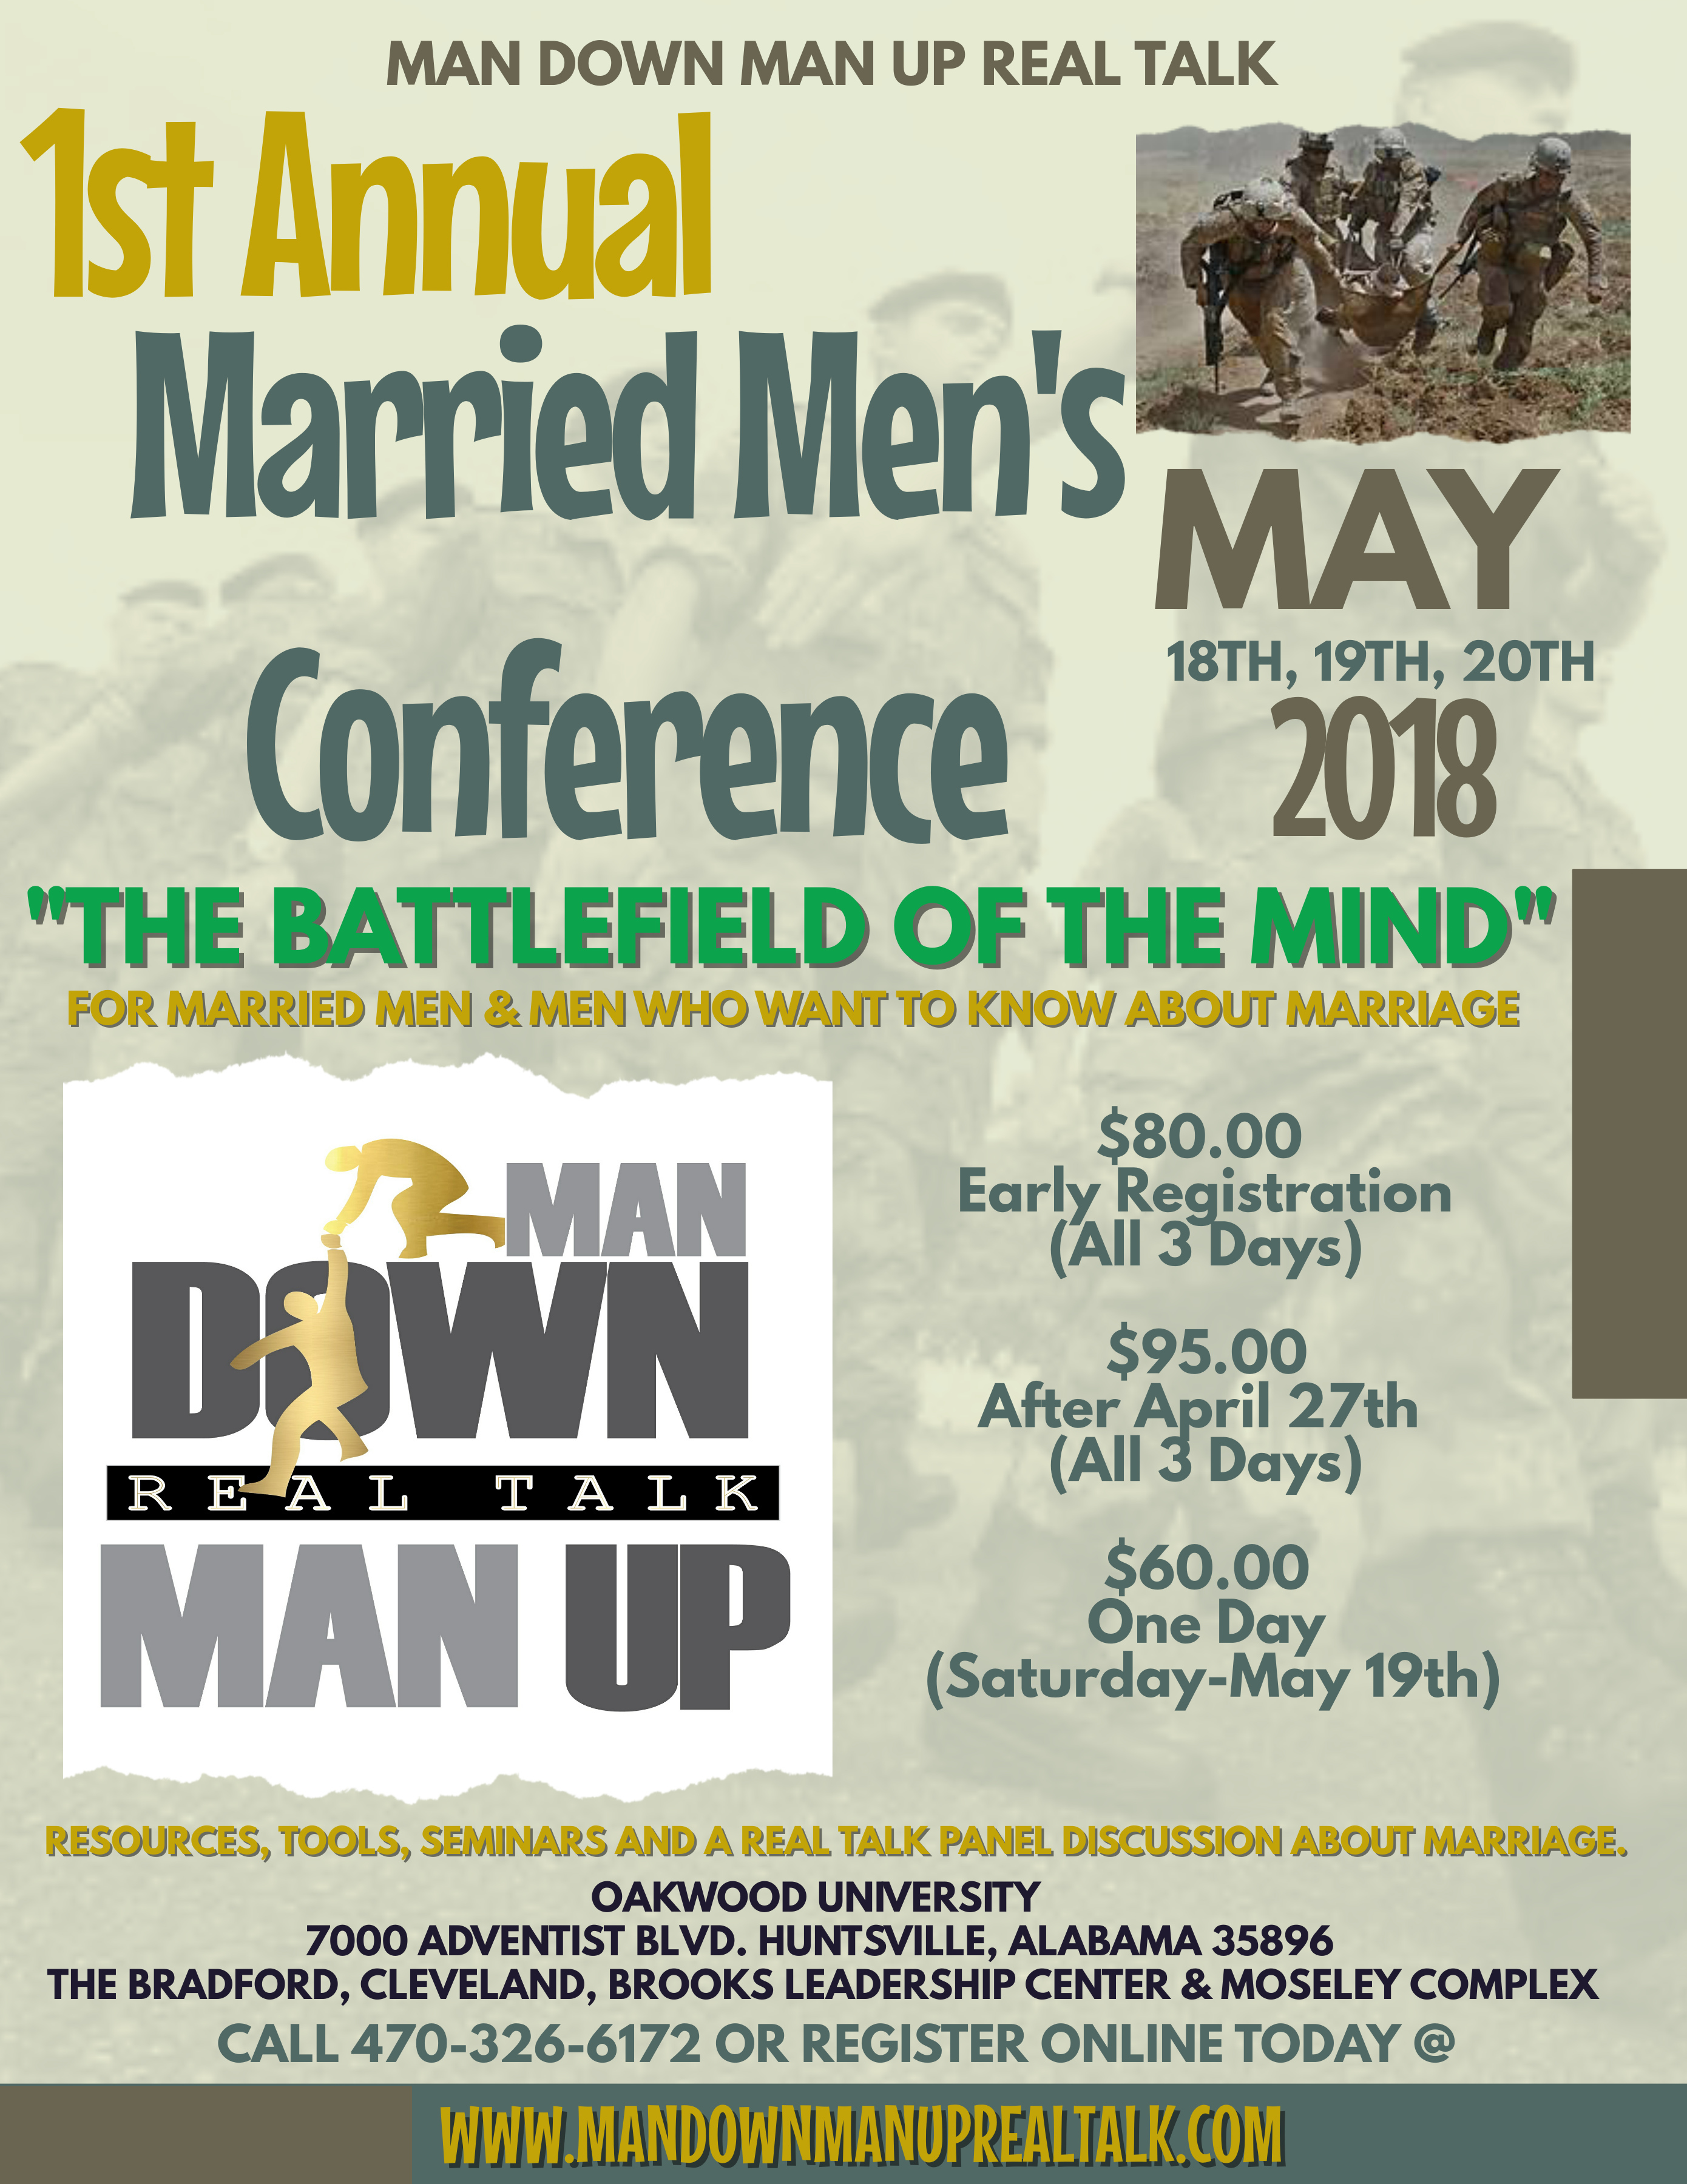 1st Annual Married Men's Conference - Battlefield of the Mind